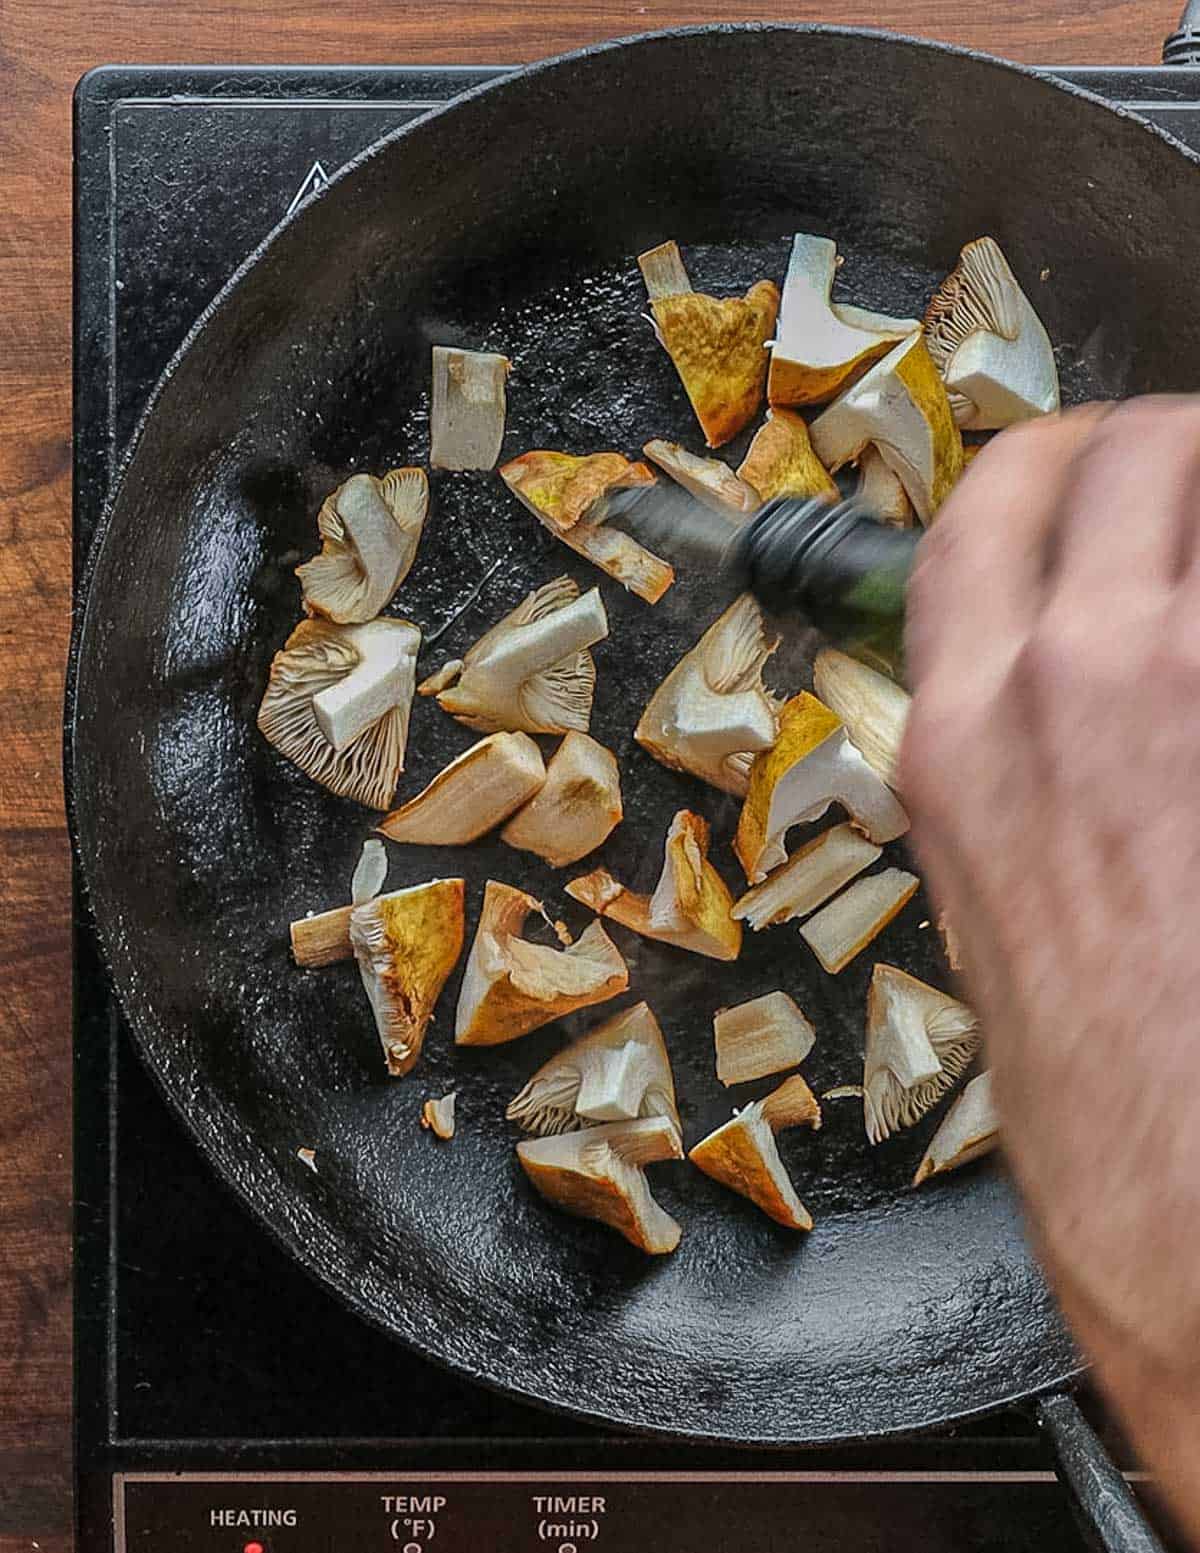 Adding oil to a pan of mushrooms. 